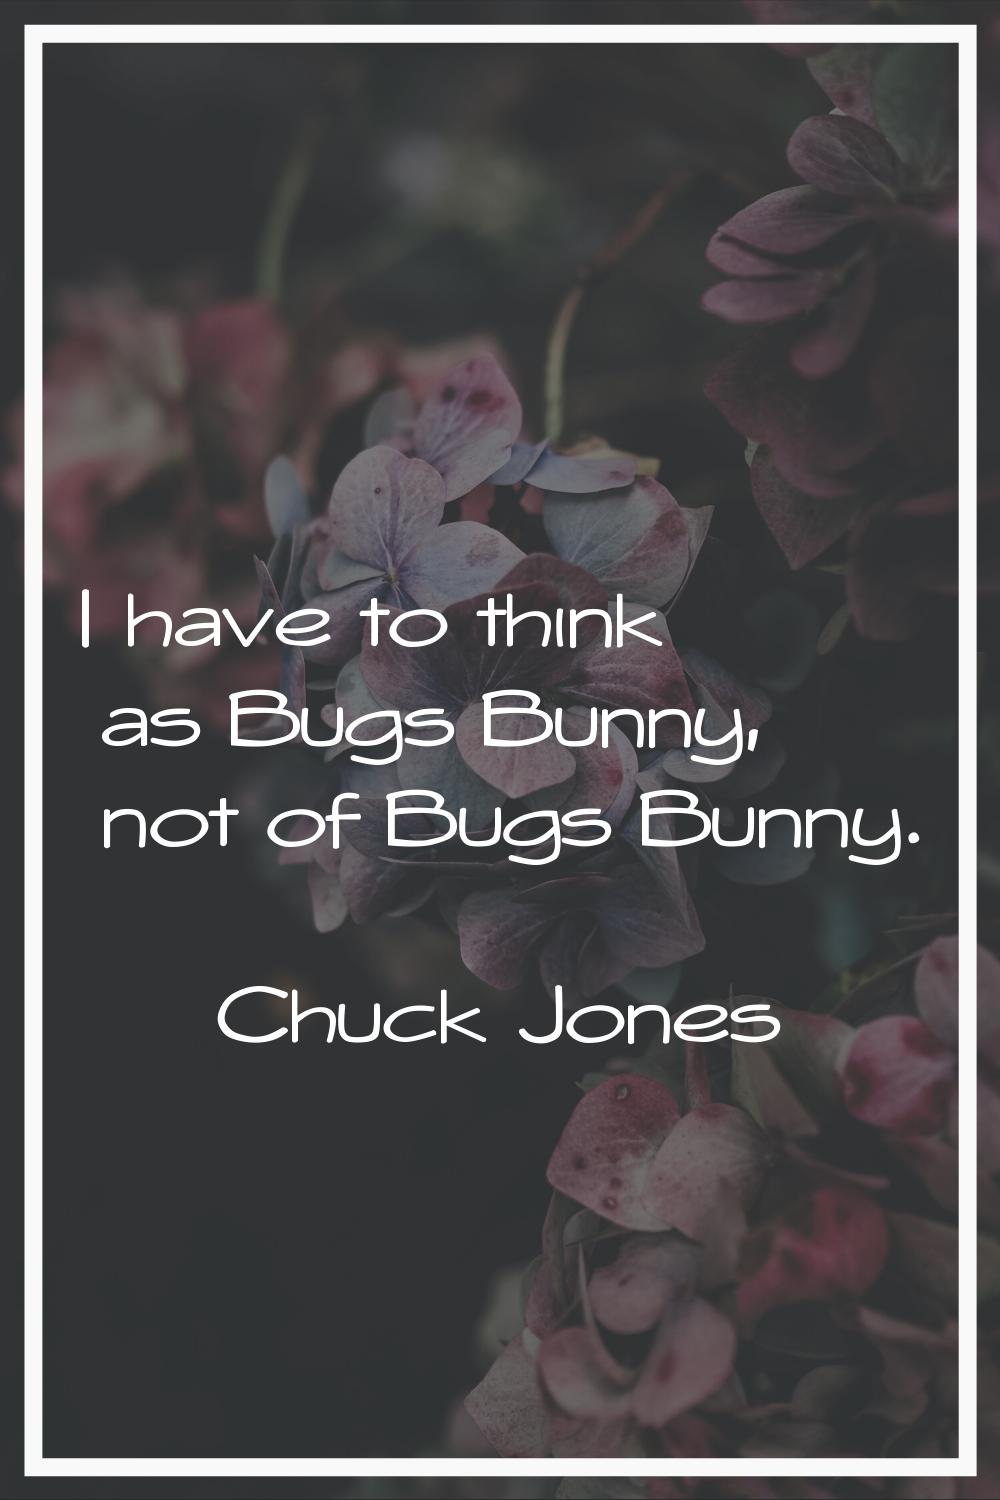 I have to think as Bugs Bunny, not of Bugs Bunny.